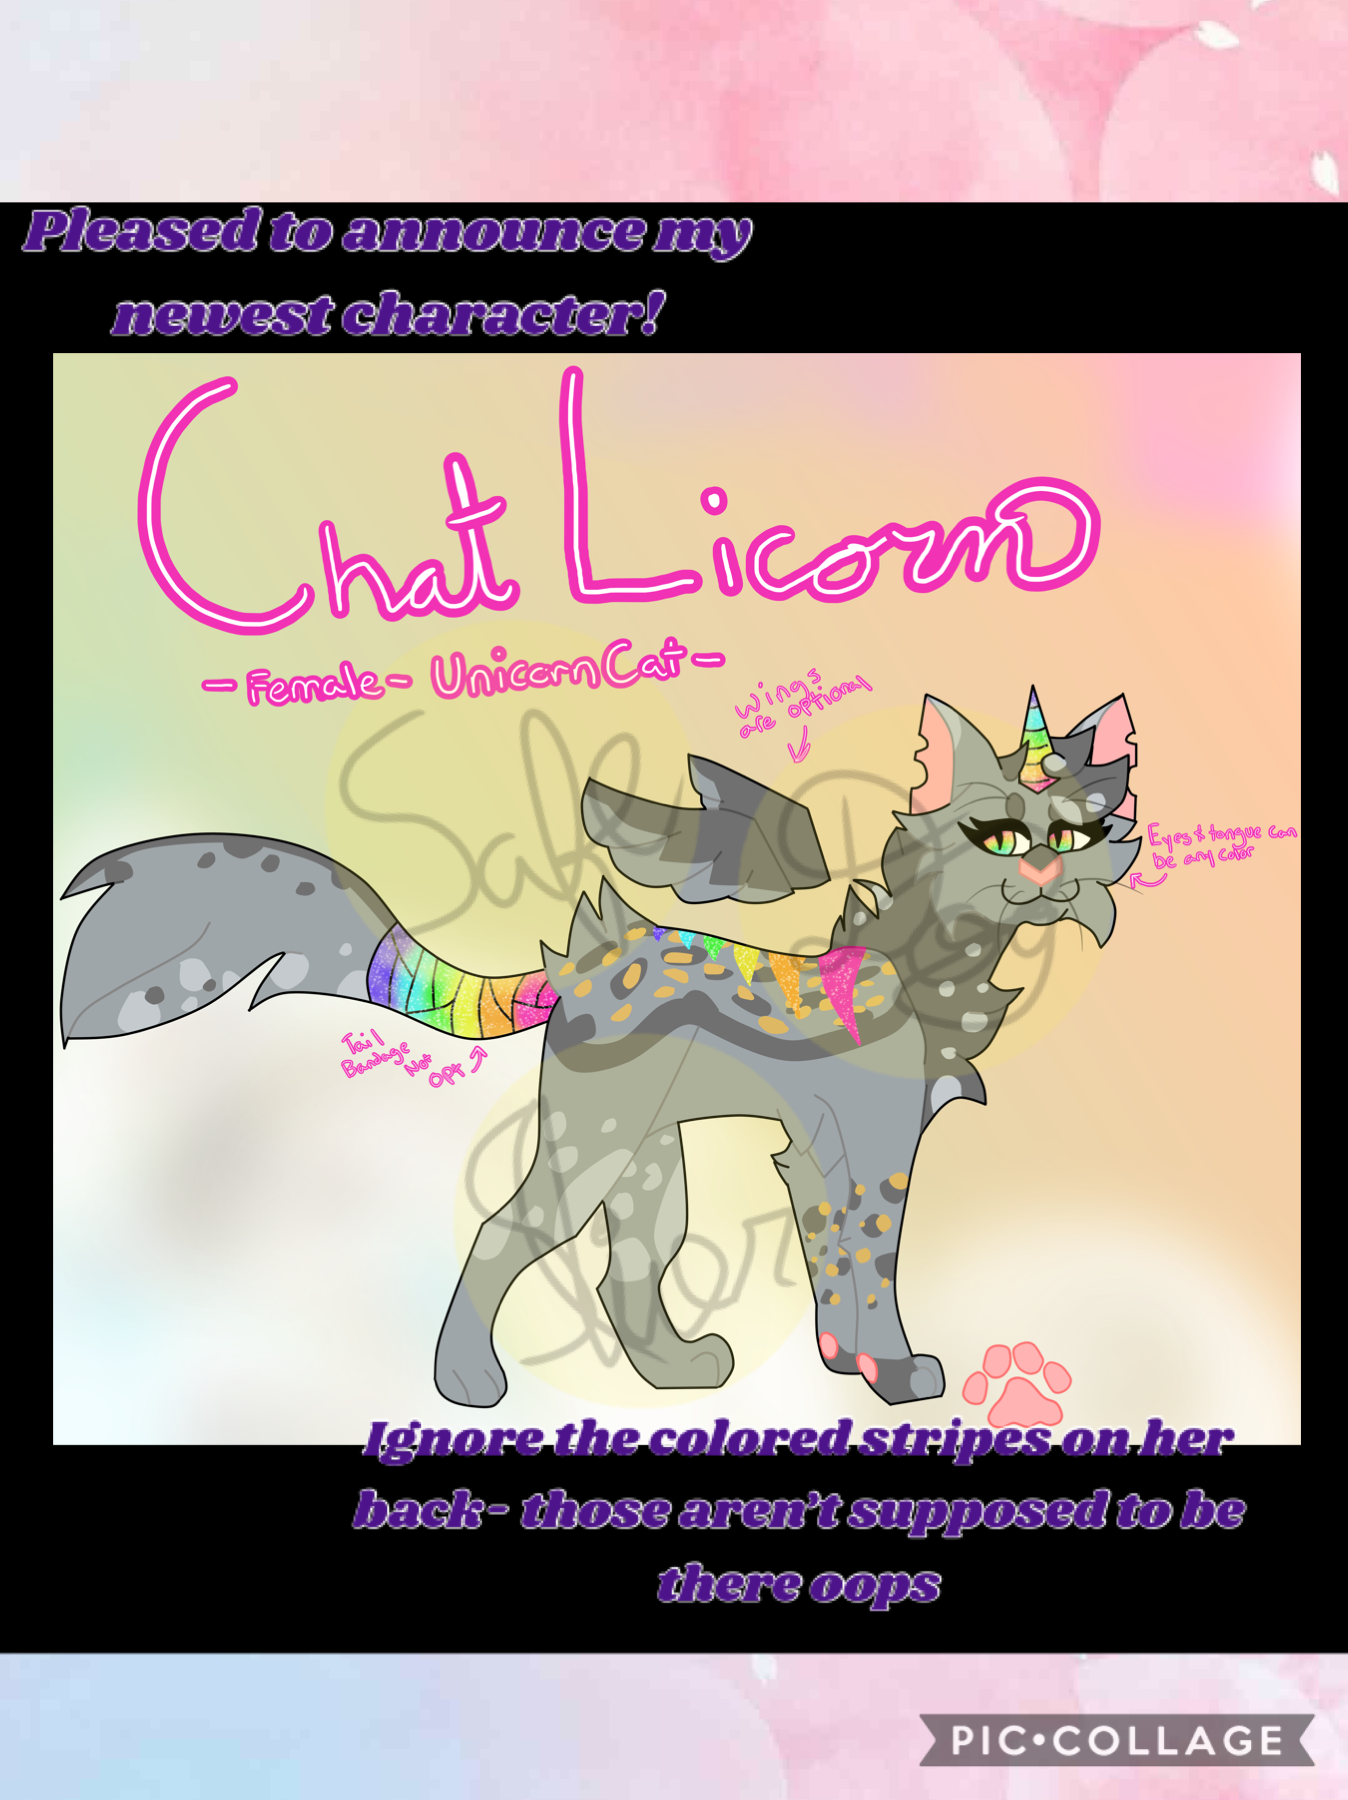 🦄NOT A REPOST!🐱
Heheheheheh new character!!!!!! This is Chat Licorne, and she’s a BIG comfort of mine already 👉👈
